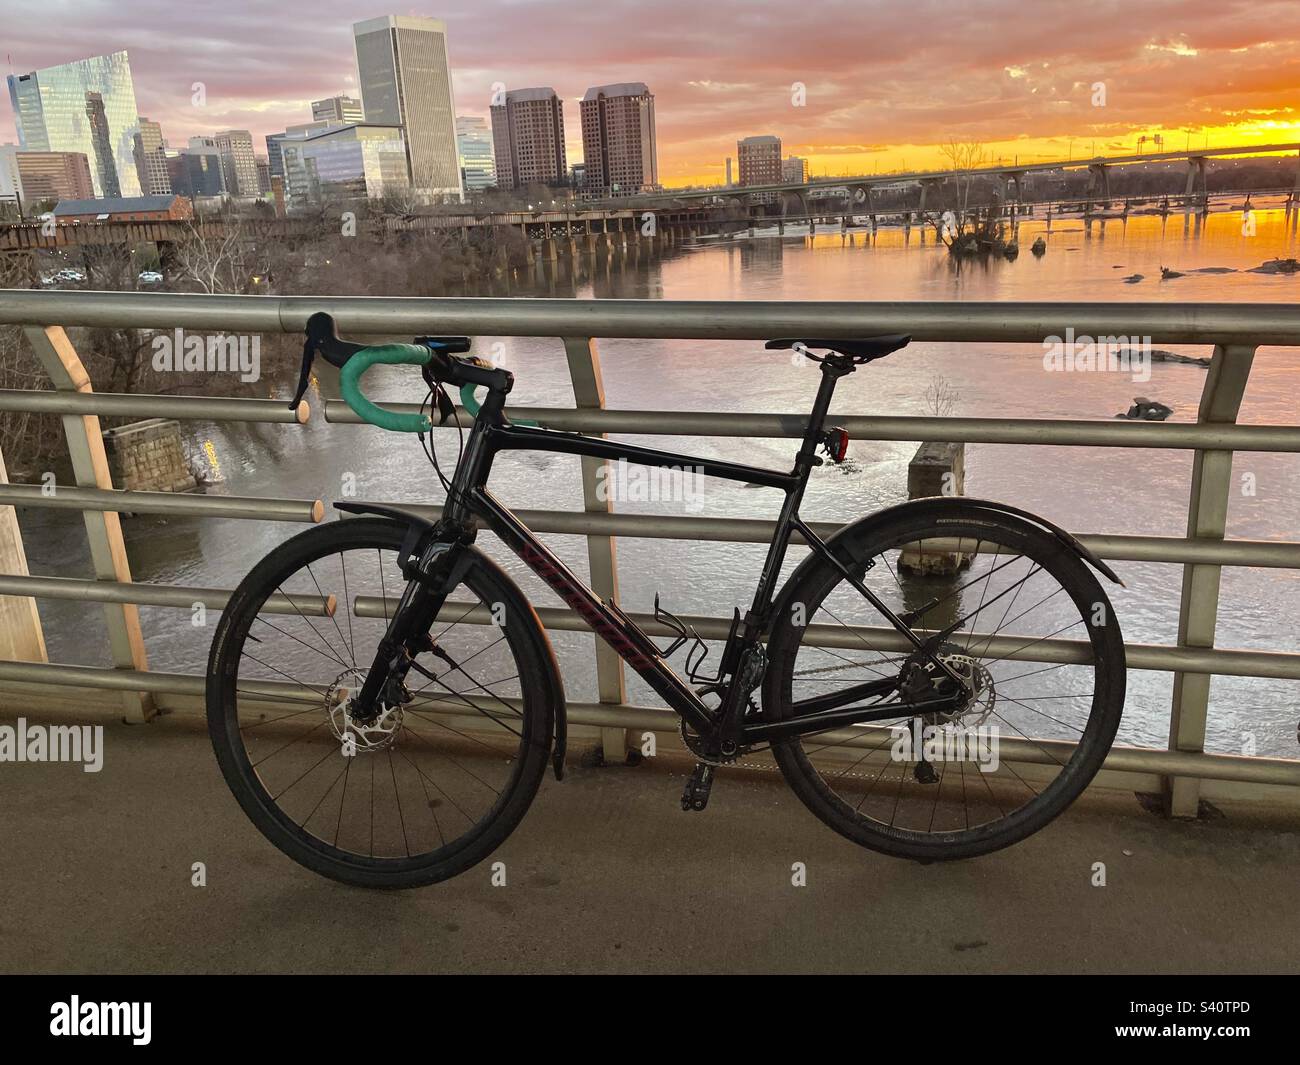 A gravel bike sits along a bridge railing in front of a waterfront cityscape in Virginia. Stock Photo